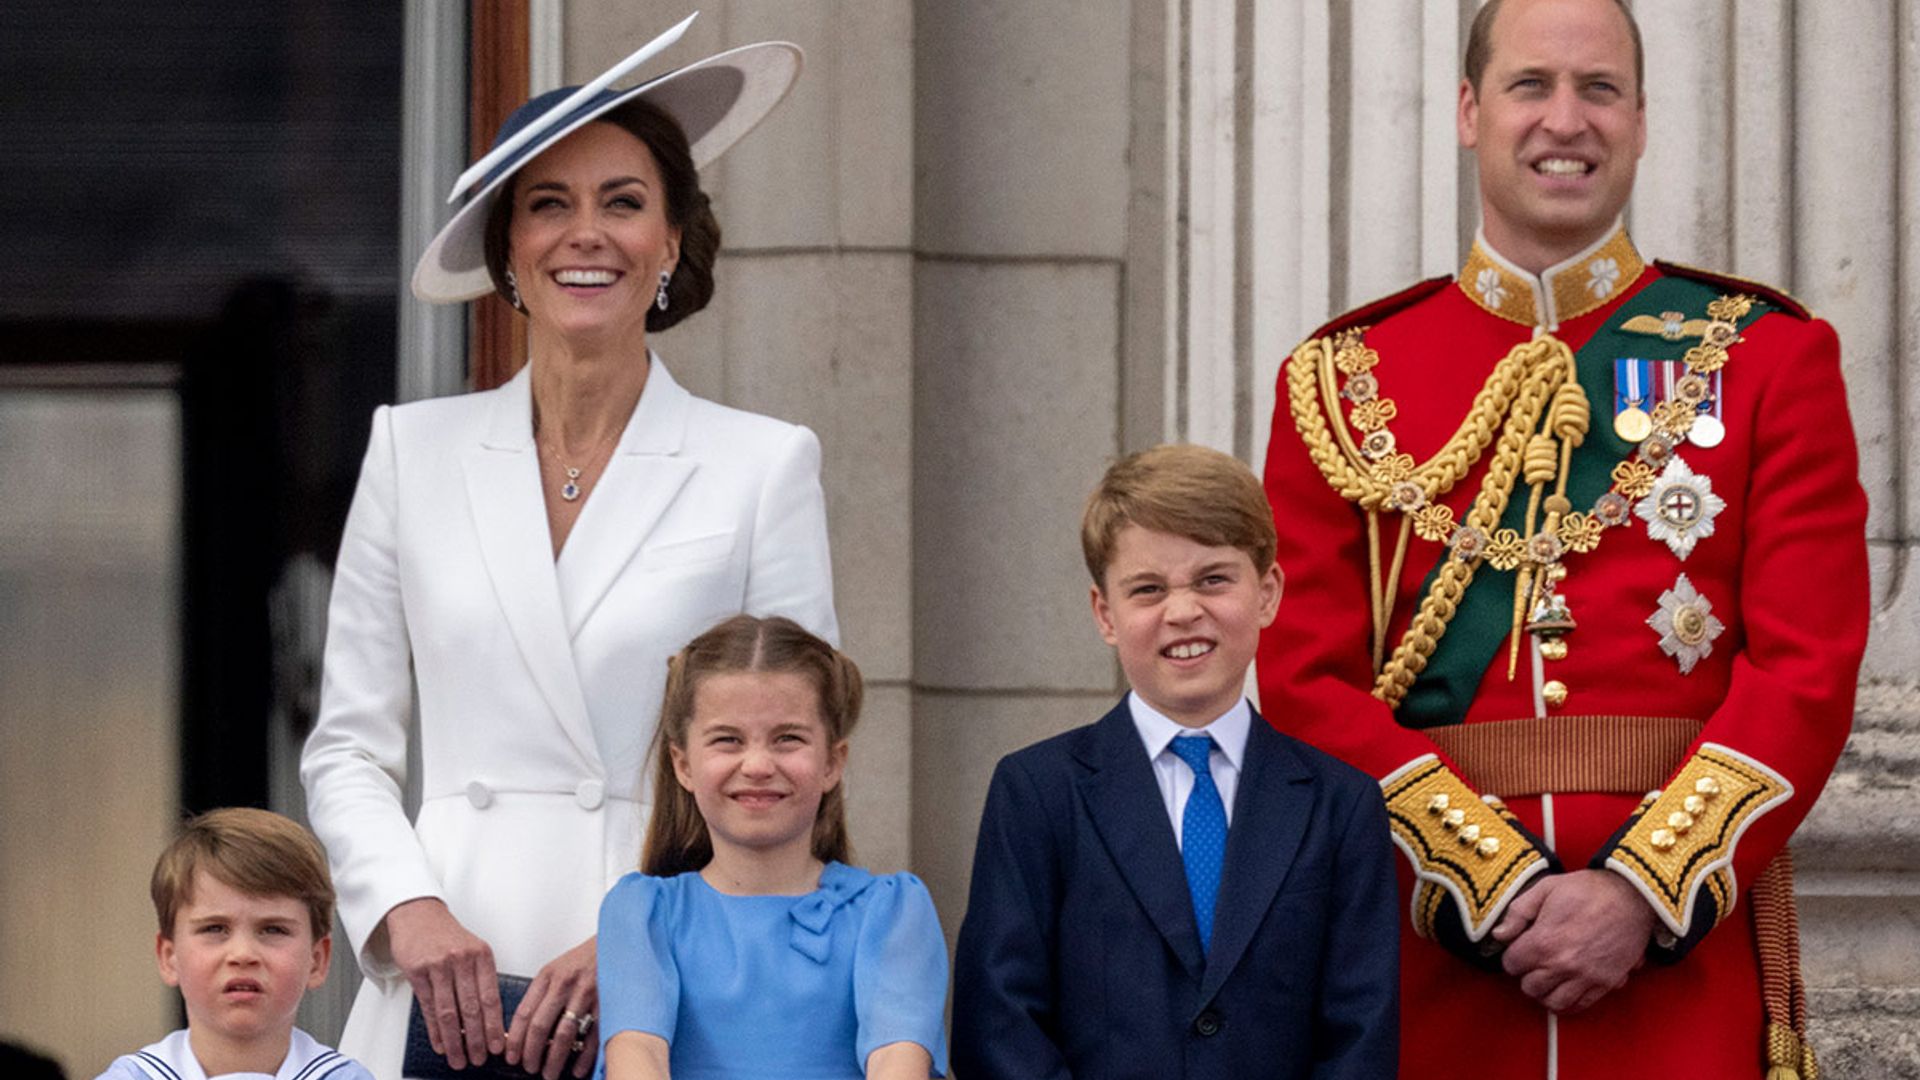 Prince William poses with Prince George, Princess Charlotte and Prince Louis for unseen Father's Day photo